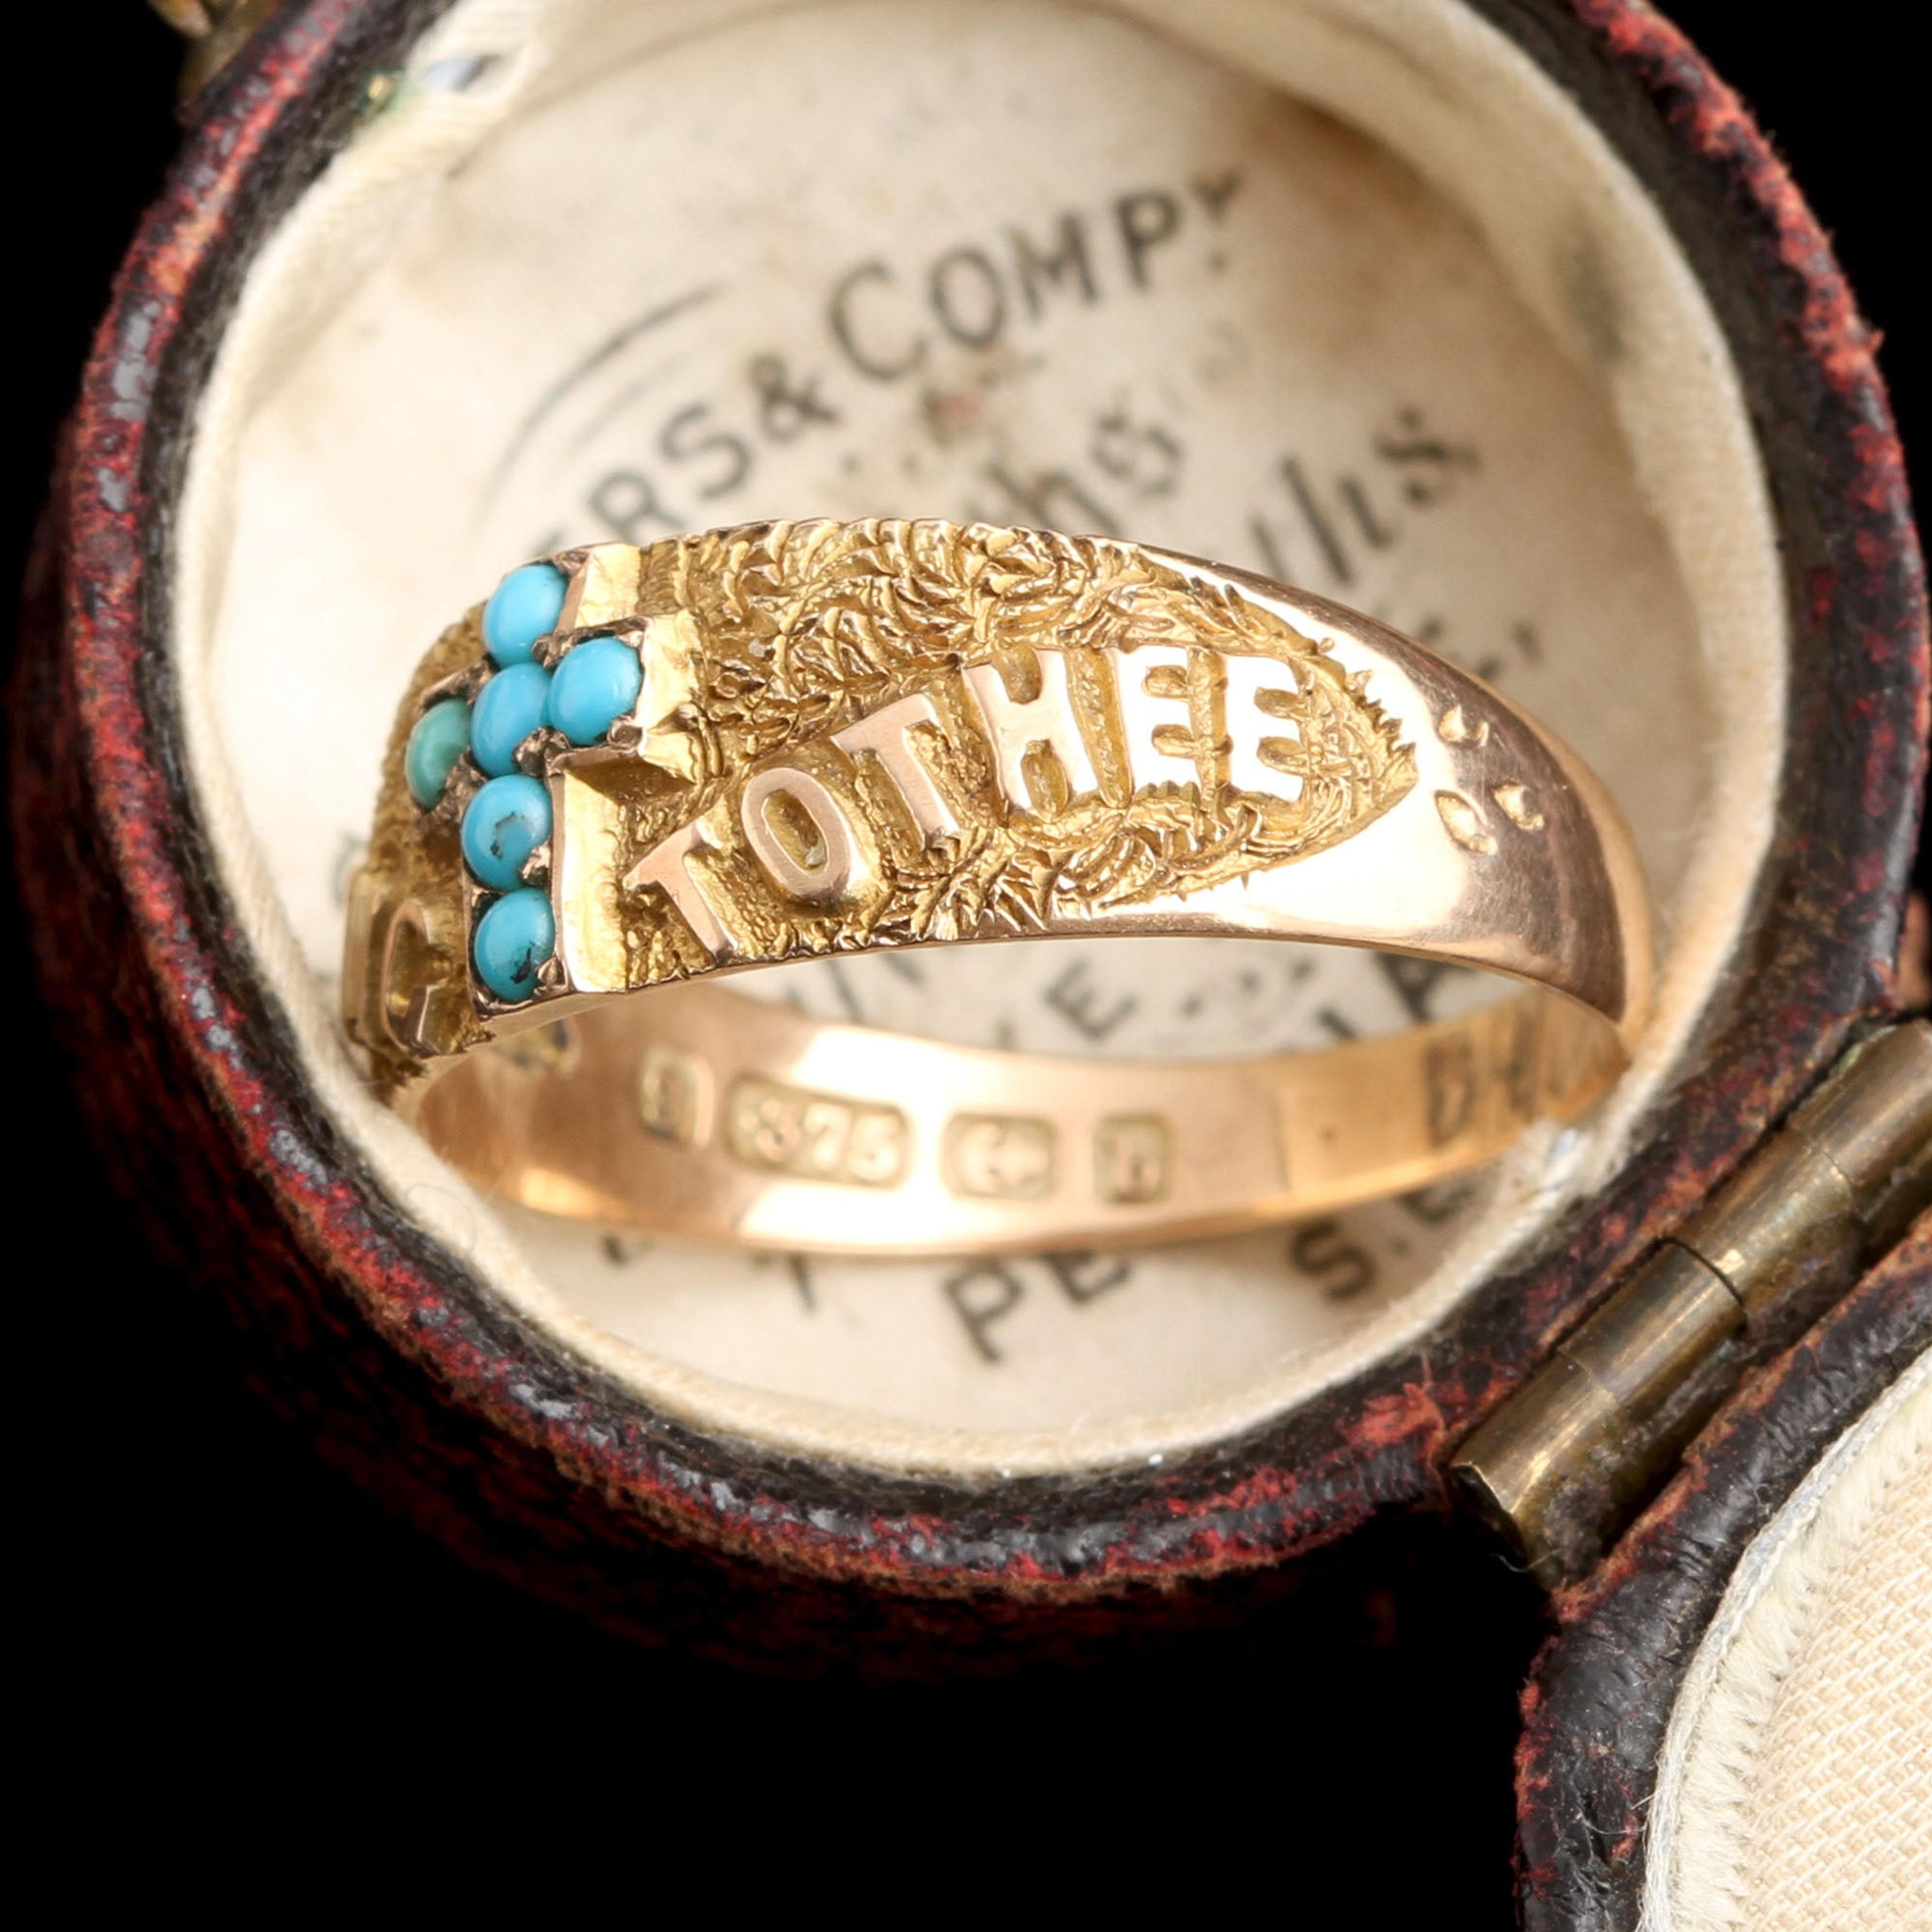 Detail of Edwardian "I Cling to Thee" Cross Ring